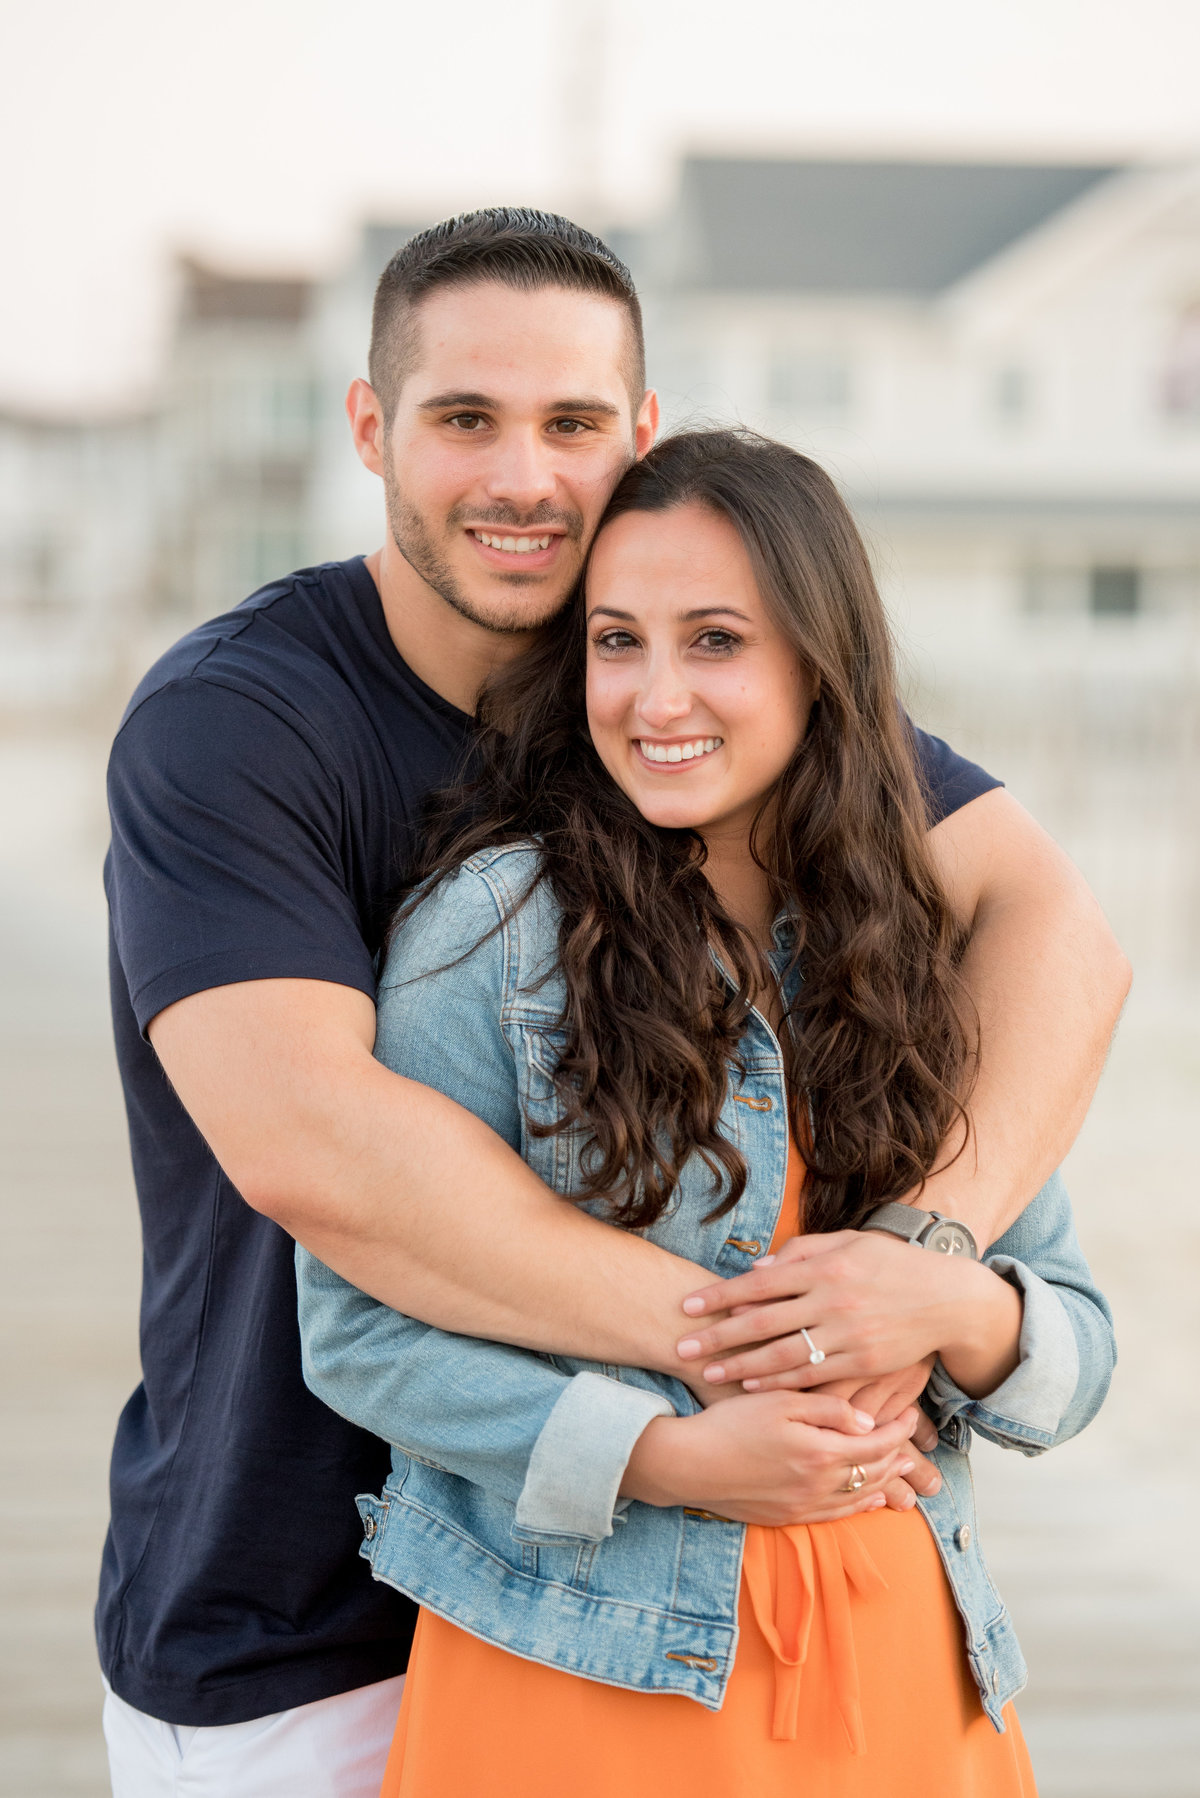 lisa-albino-lavallette-beach-surprise-proposal-imagery-by-marianne-2019-112